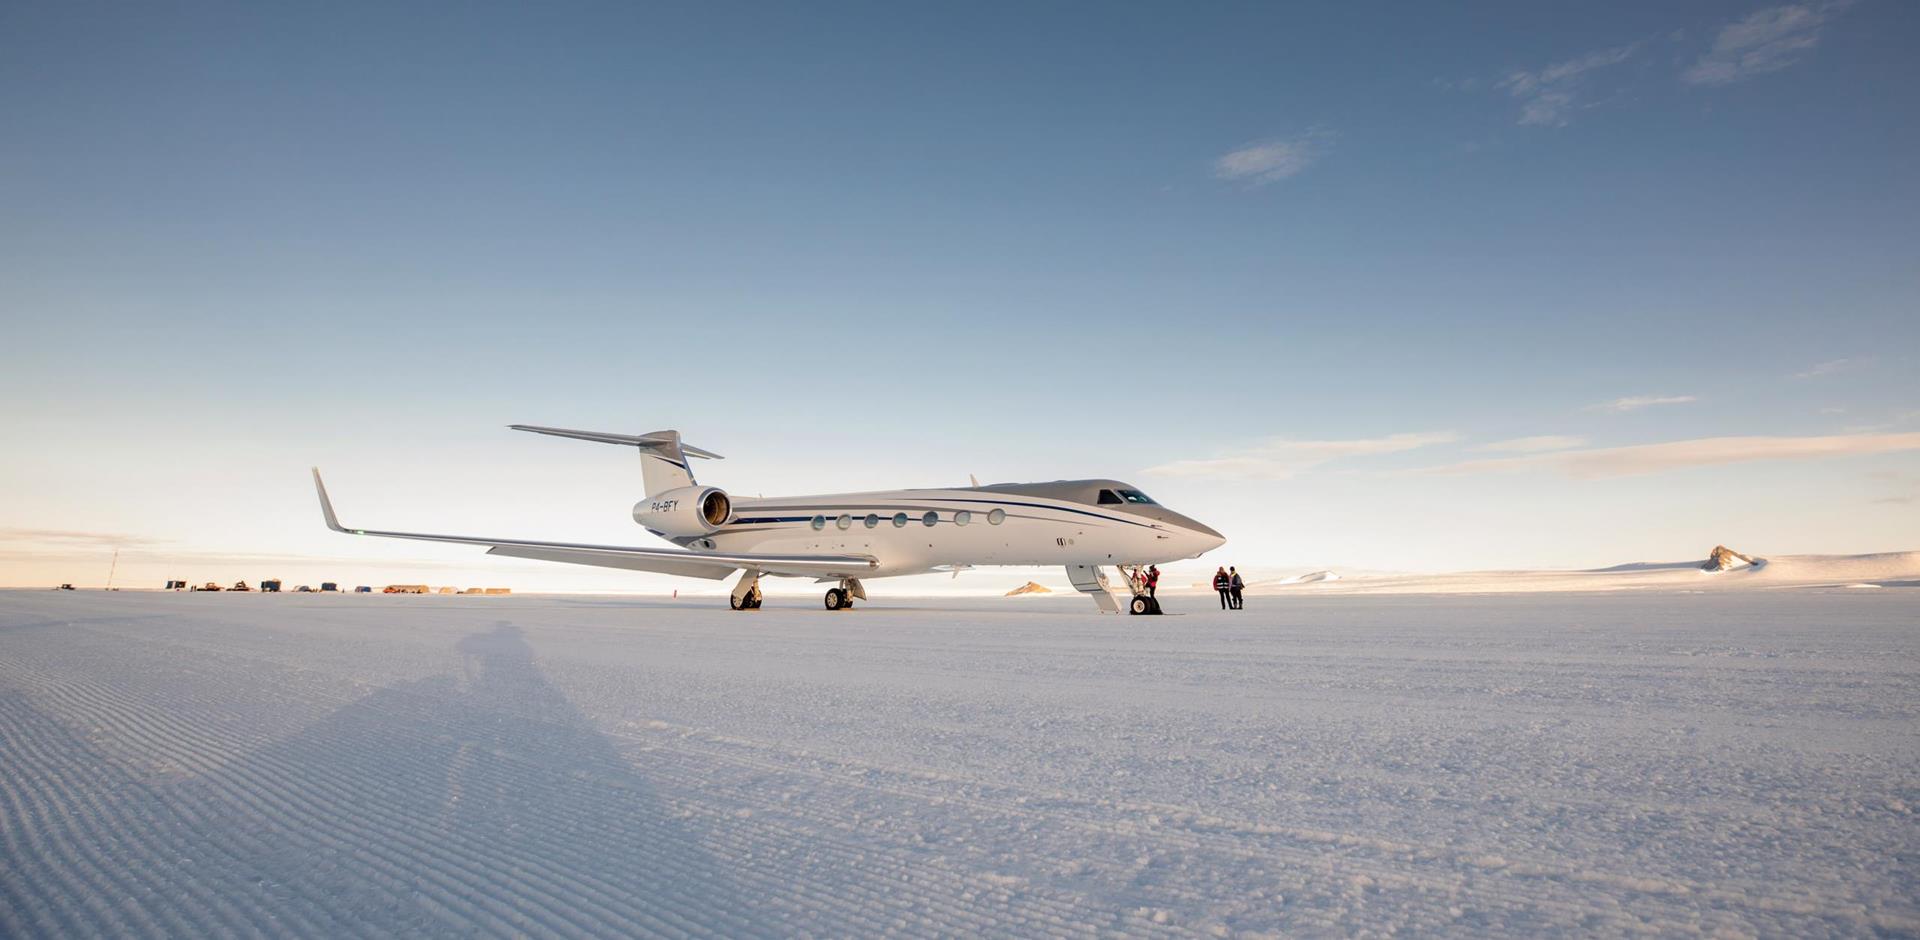 Around the world by private jet